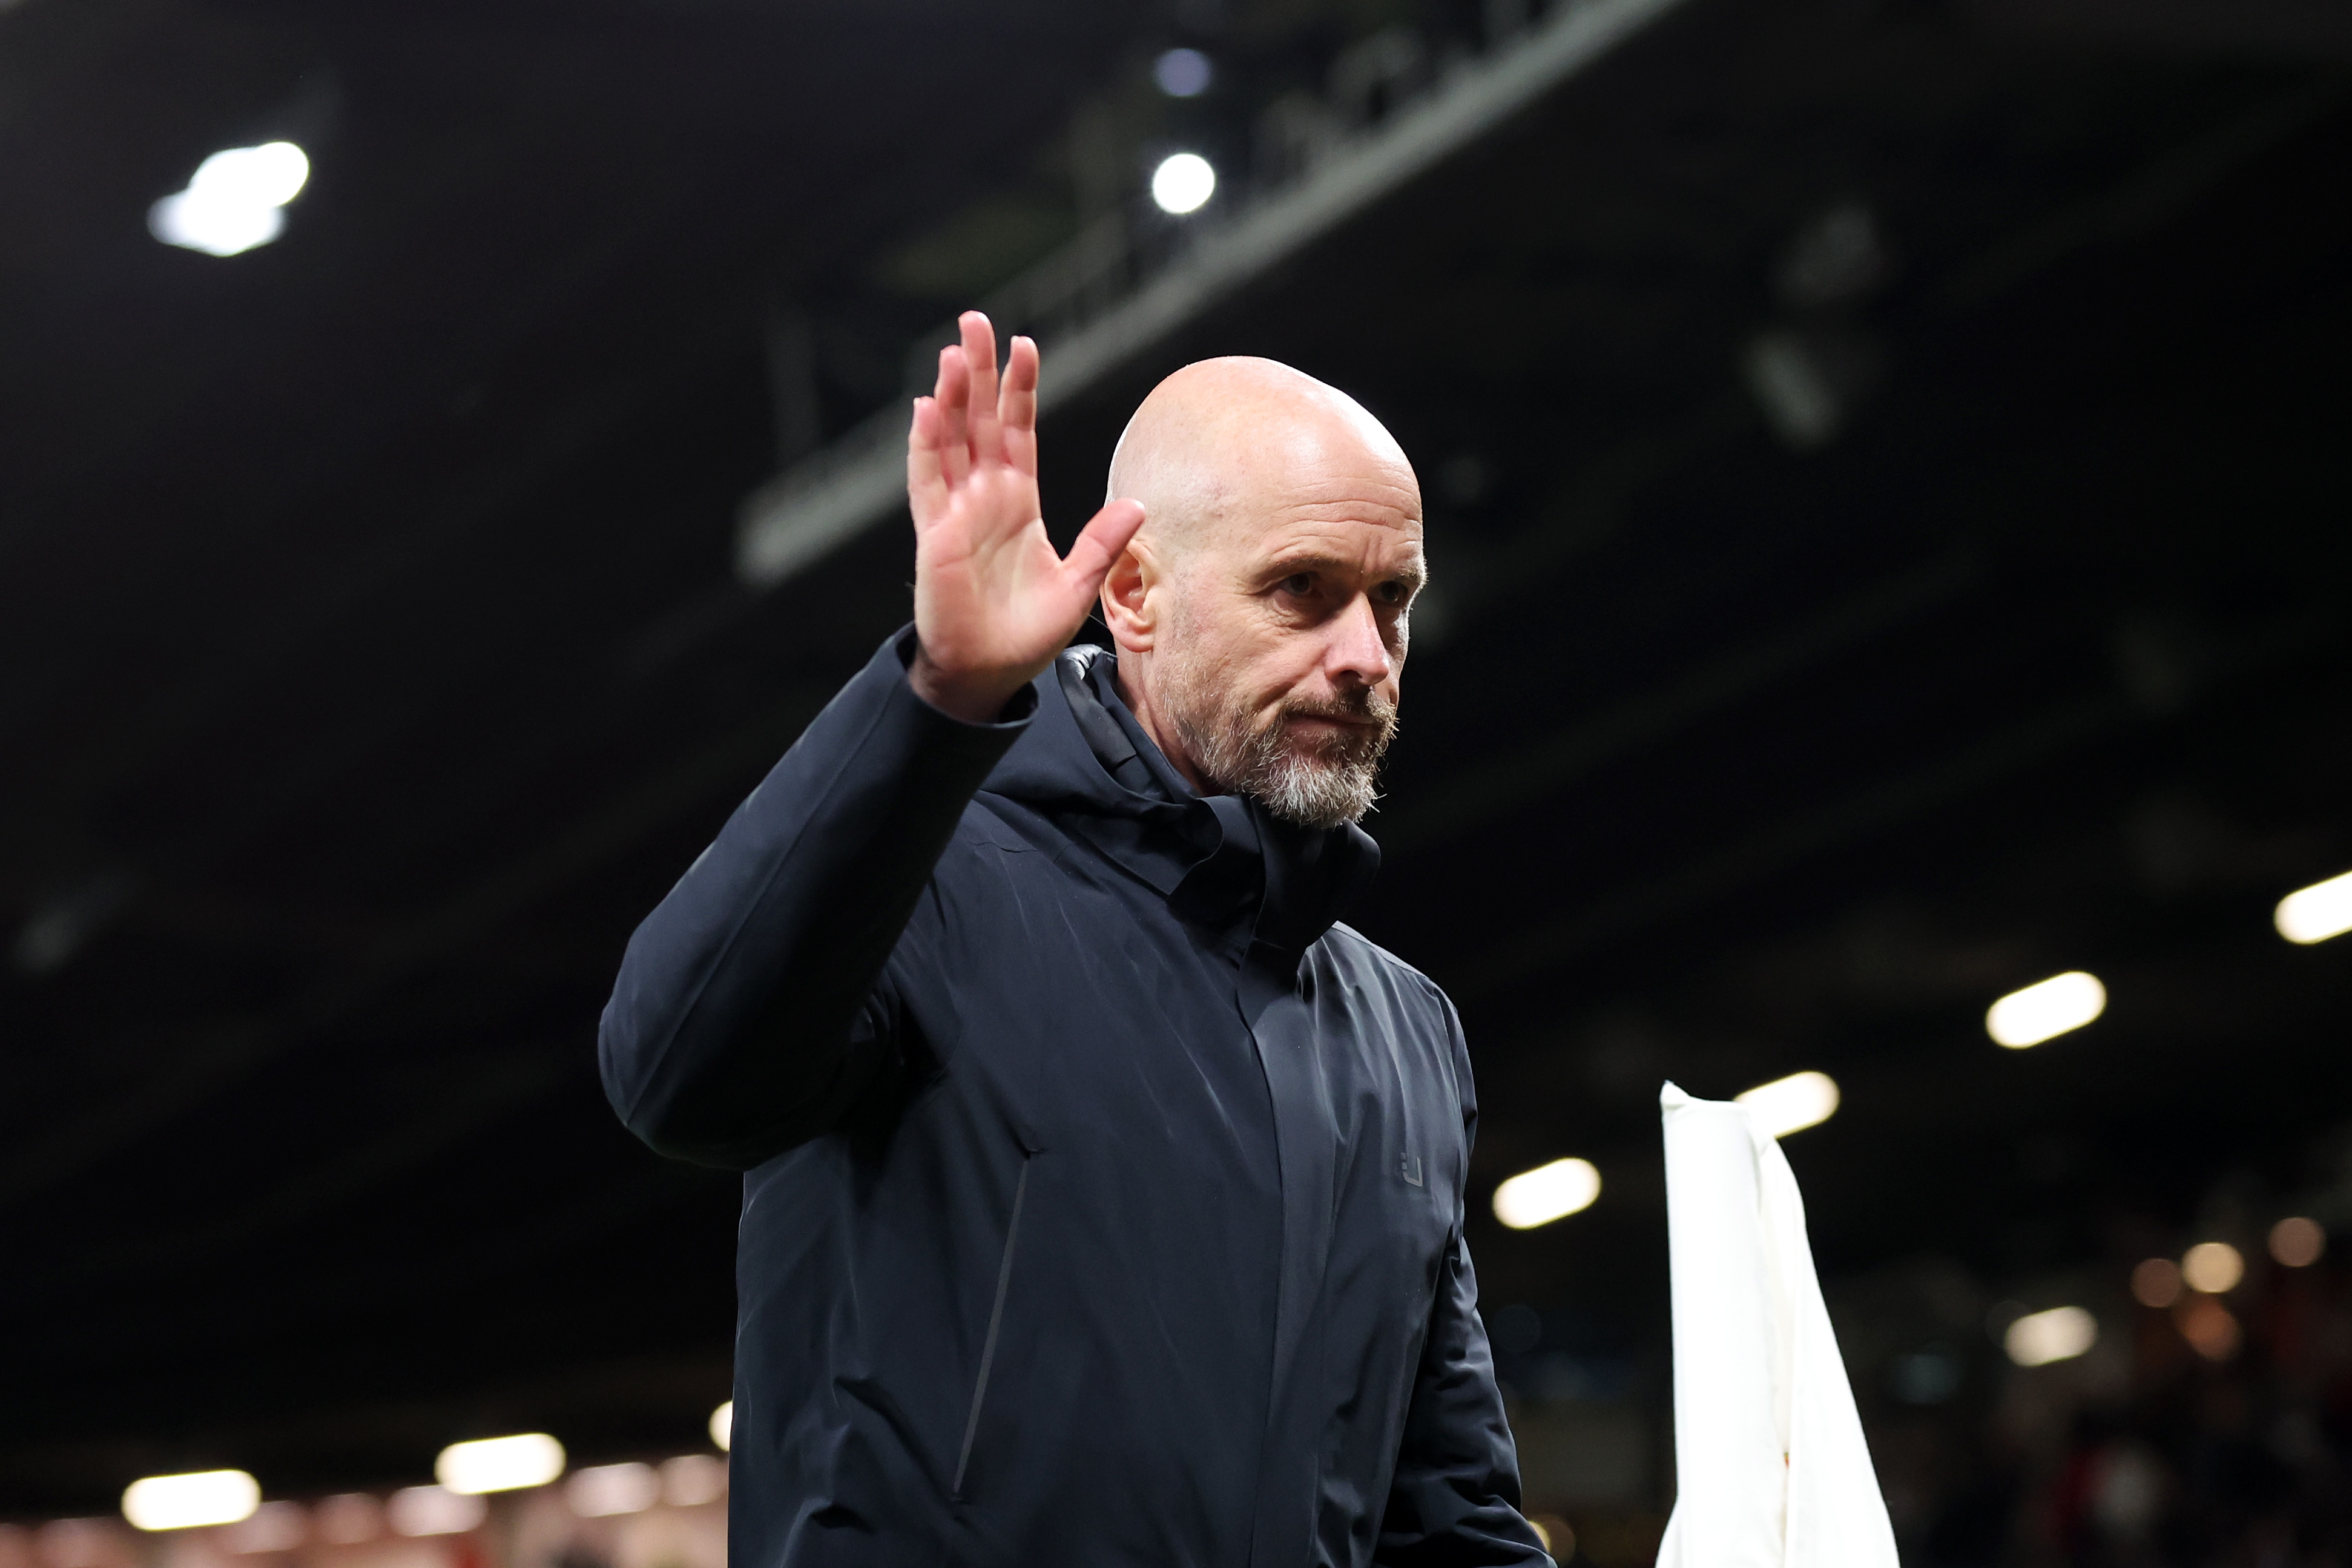 Erik ten Hag may have next job already lined up if sacked by Manchester United